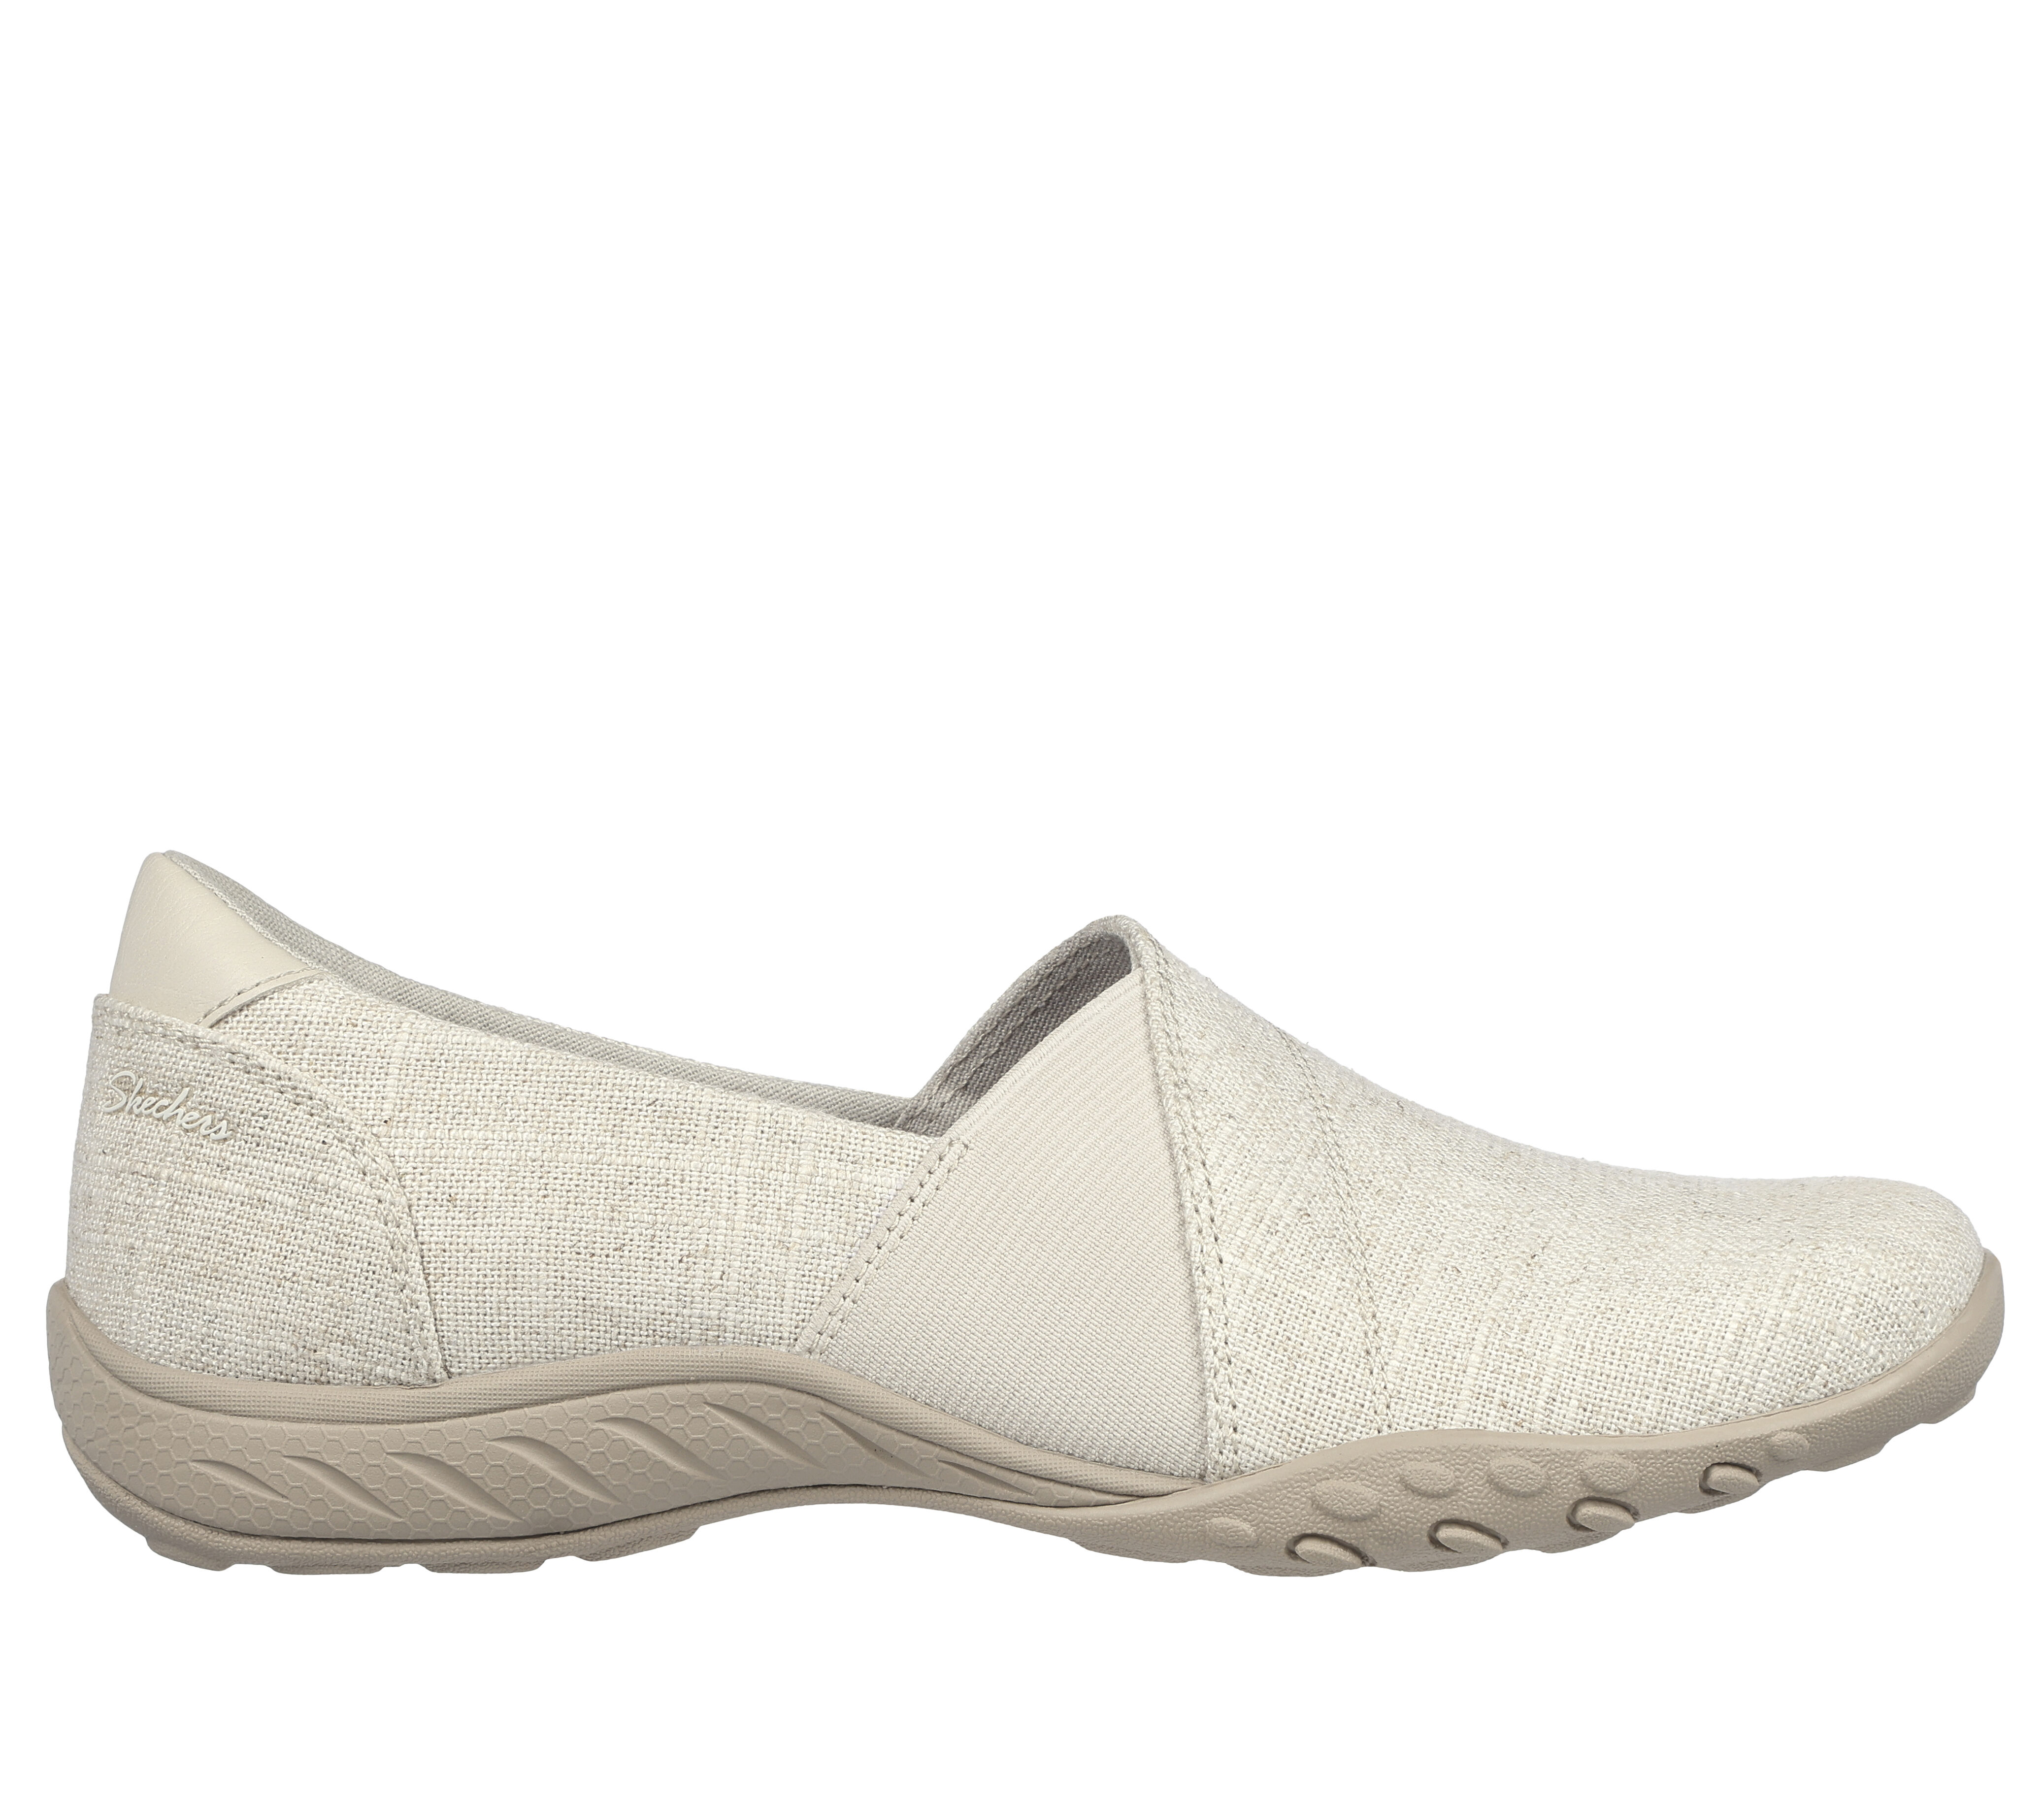 Relaxed Fit: Breathe-Easy - Swayful | SKECHERS